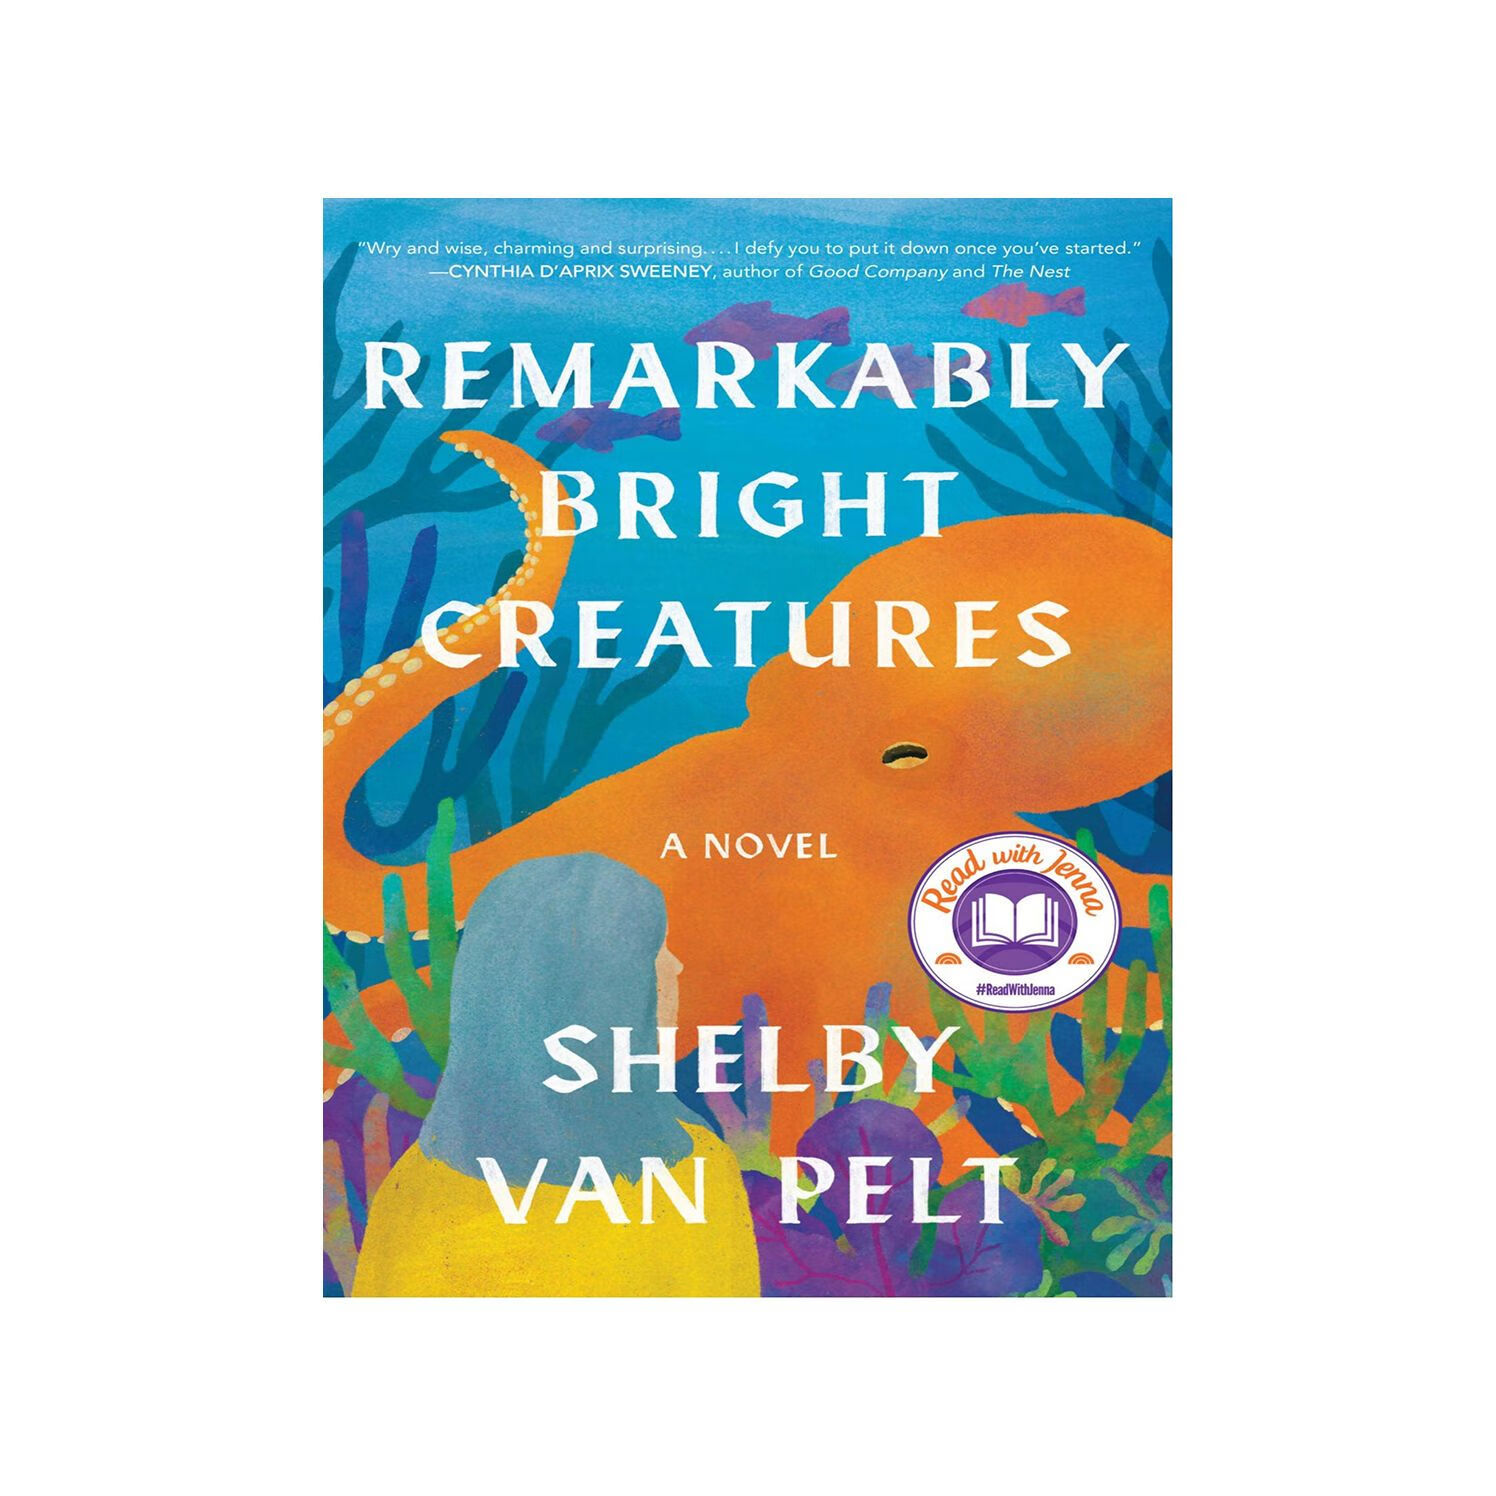 Remarkably Bright Creatures: A Novel txt格式下载